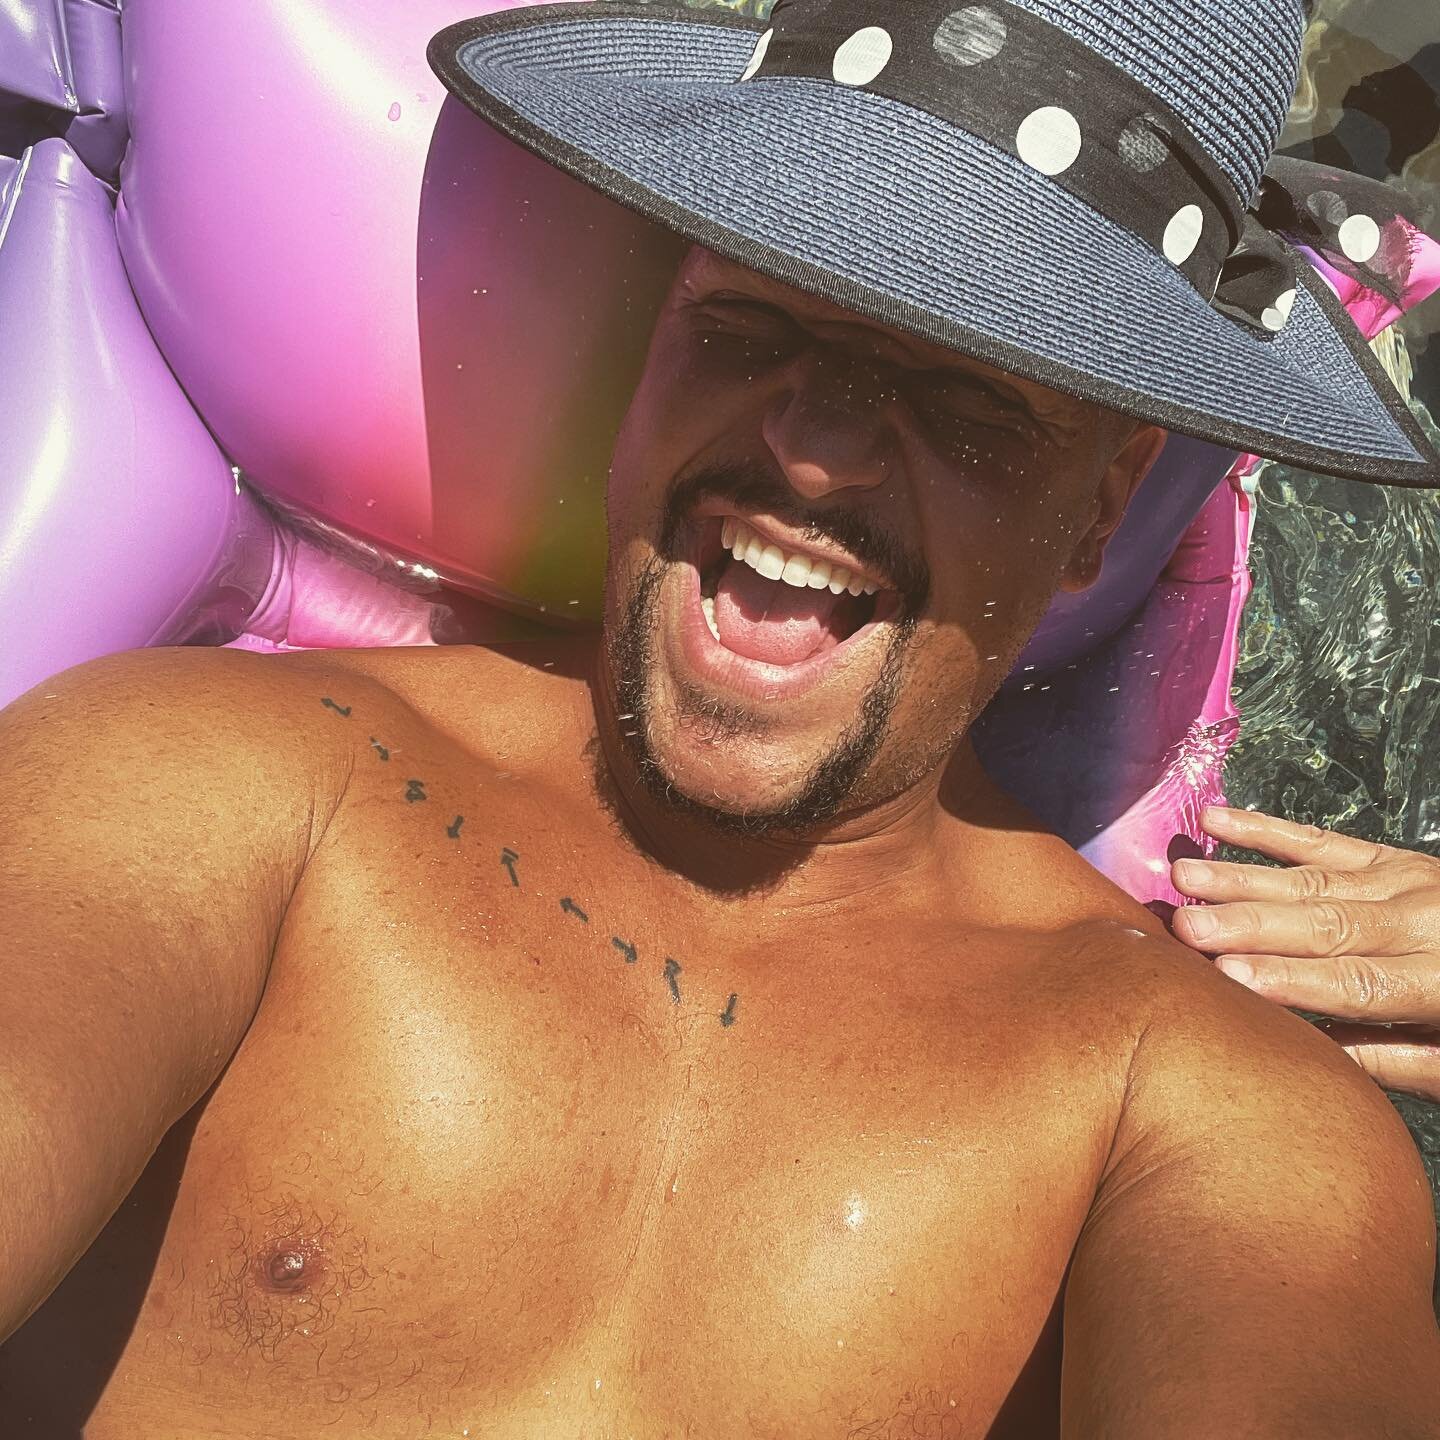 Summer BEGINS!!!! #pridemonth #pride #pride🌈 #poolday #queerpride #facial #bearsofinstagram🐻 #churchhat
☀️
(ps I&rsquo;m at work but dreaming of being back in the pool!)
☀️
pps- that hand splashing me is &hearts;️ @rosiere1972